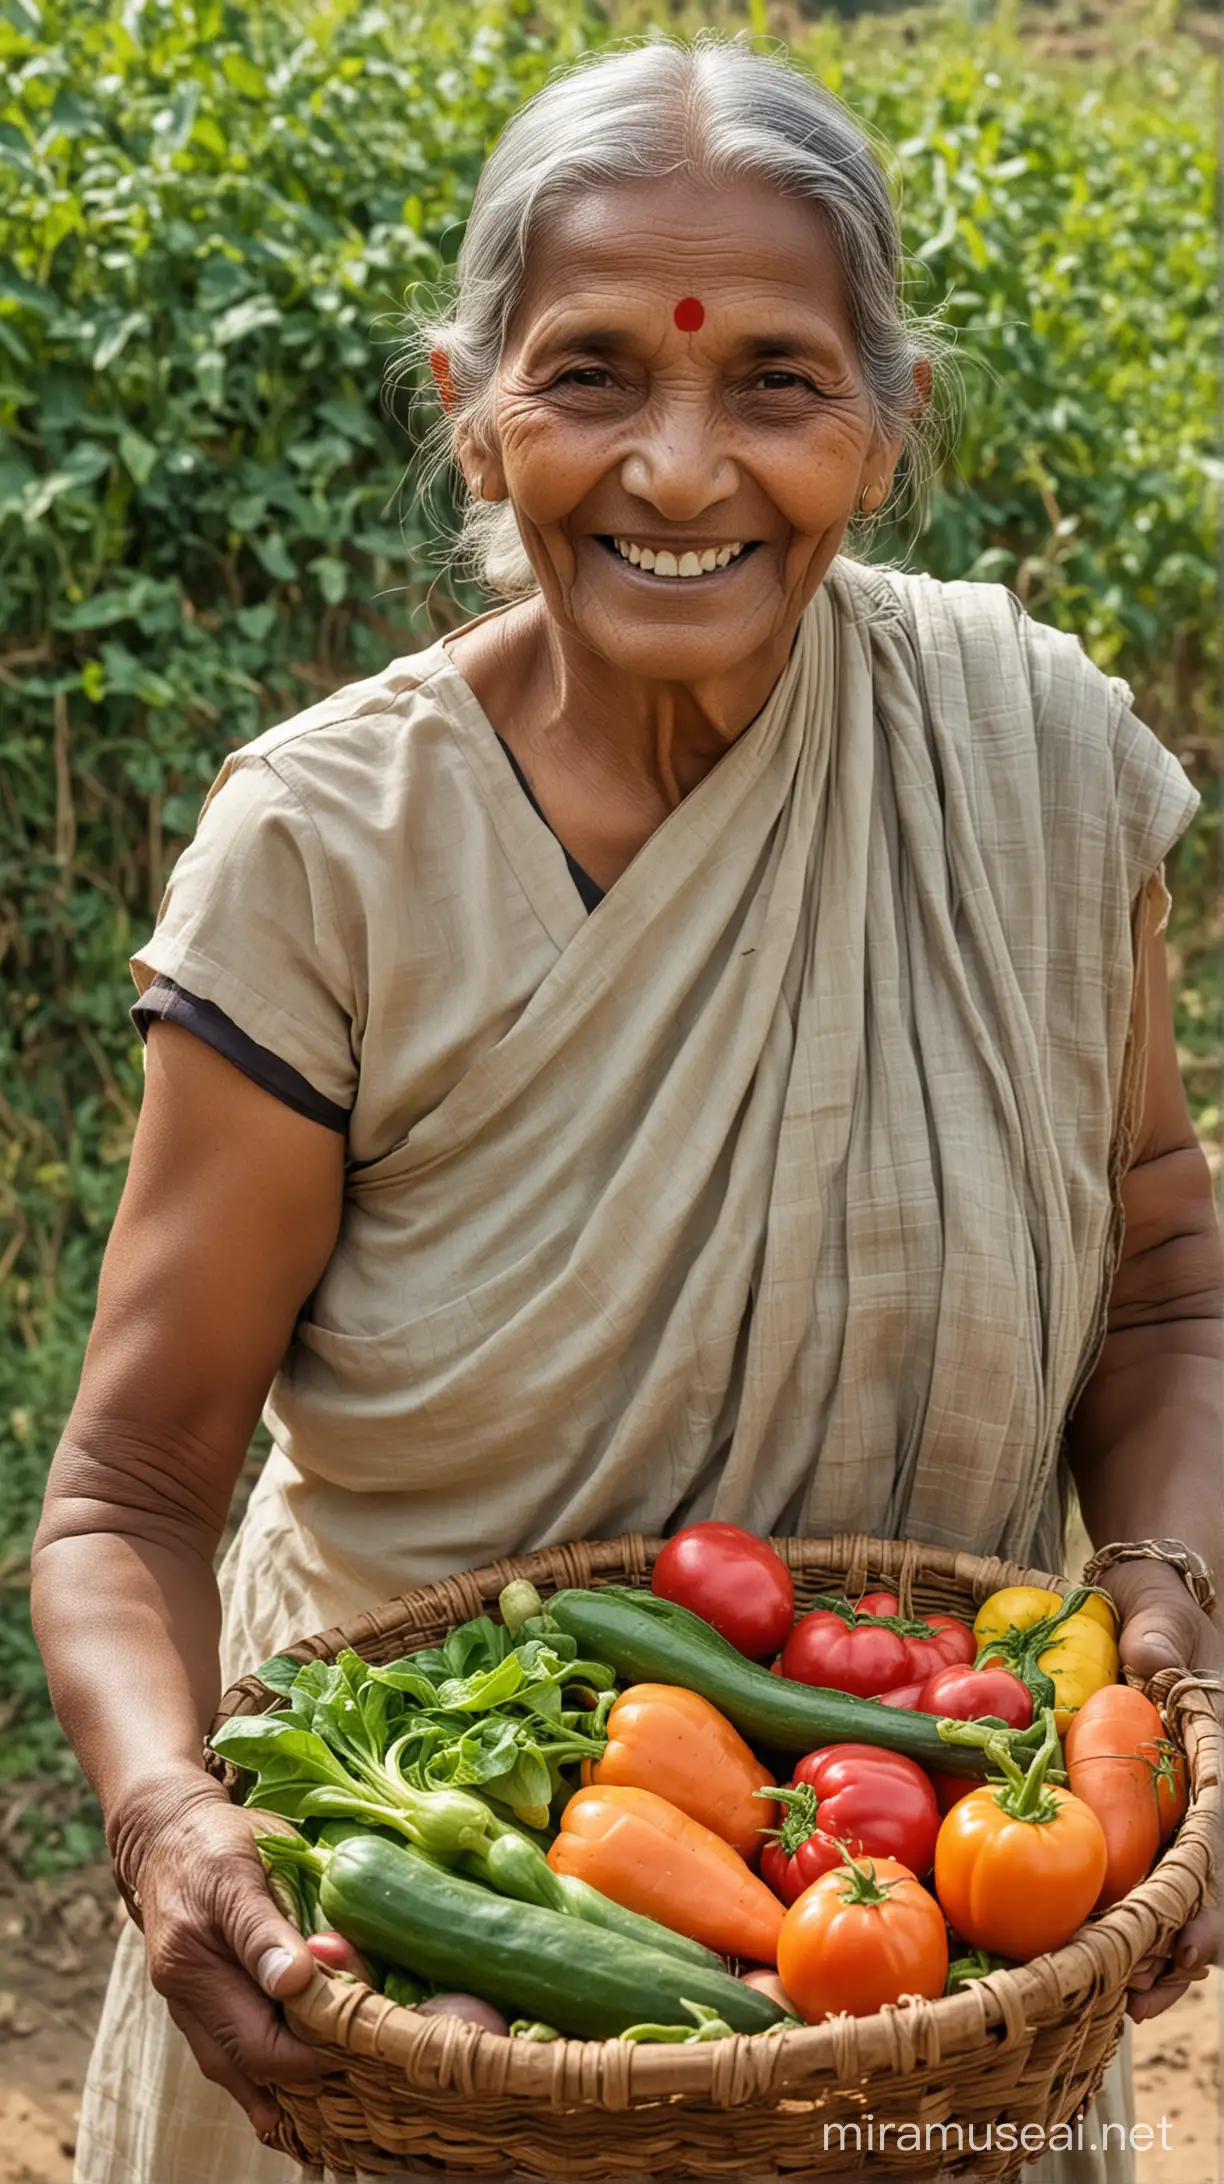 Old Indian lady with farm wooden basket vegetables in her hand, smiling